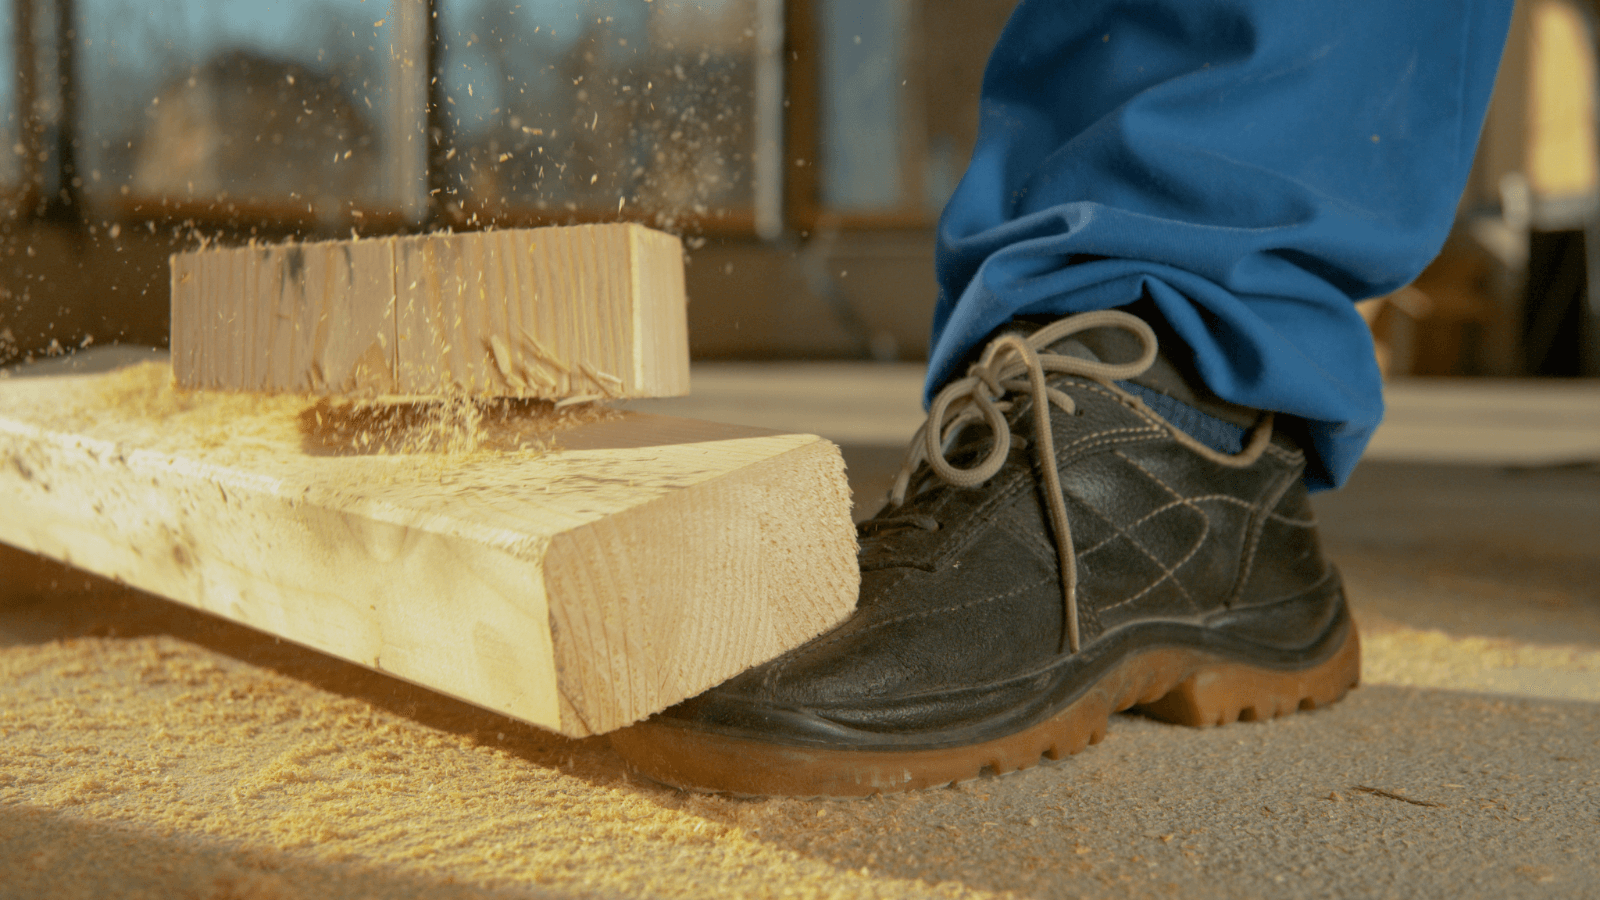 An insiders guide-Knowing difference between safety shoes and work boots